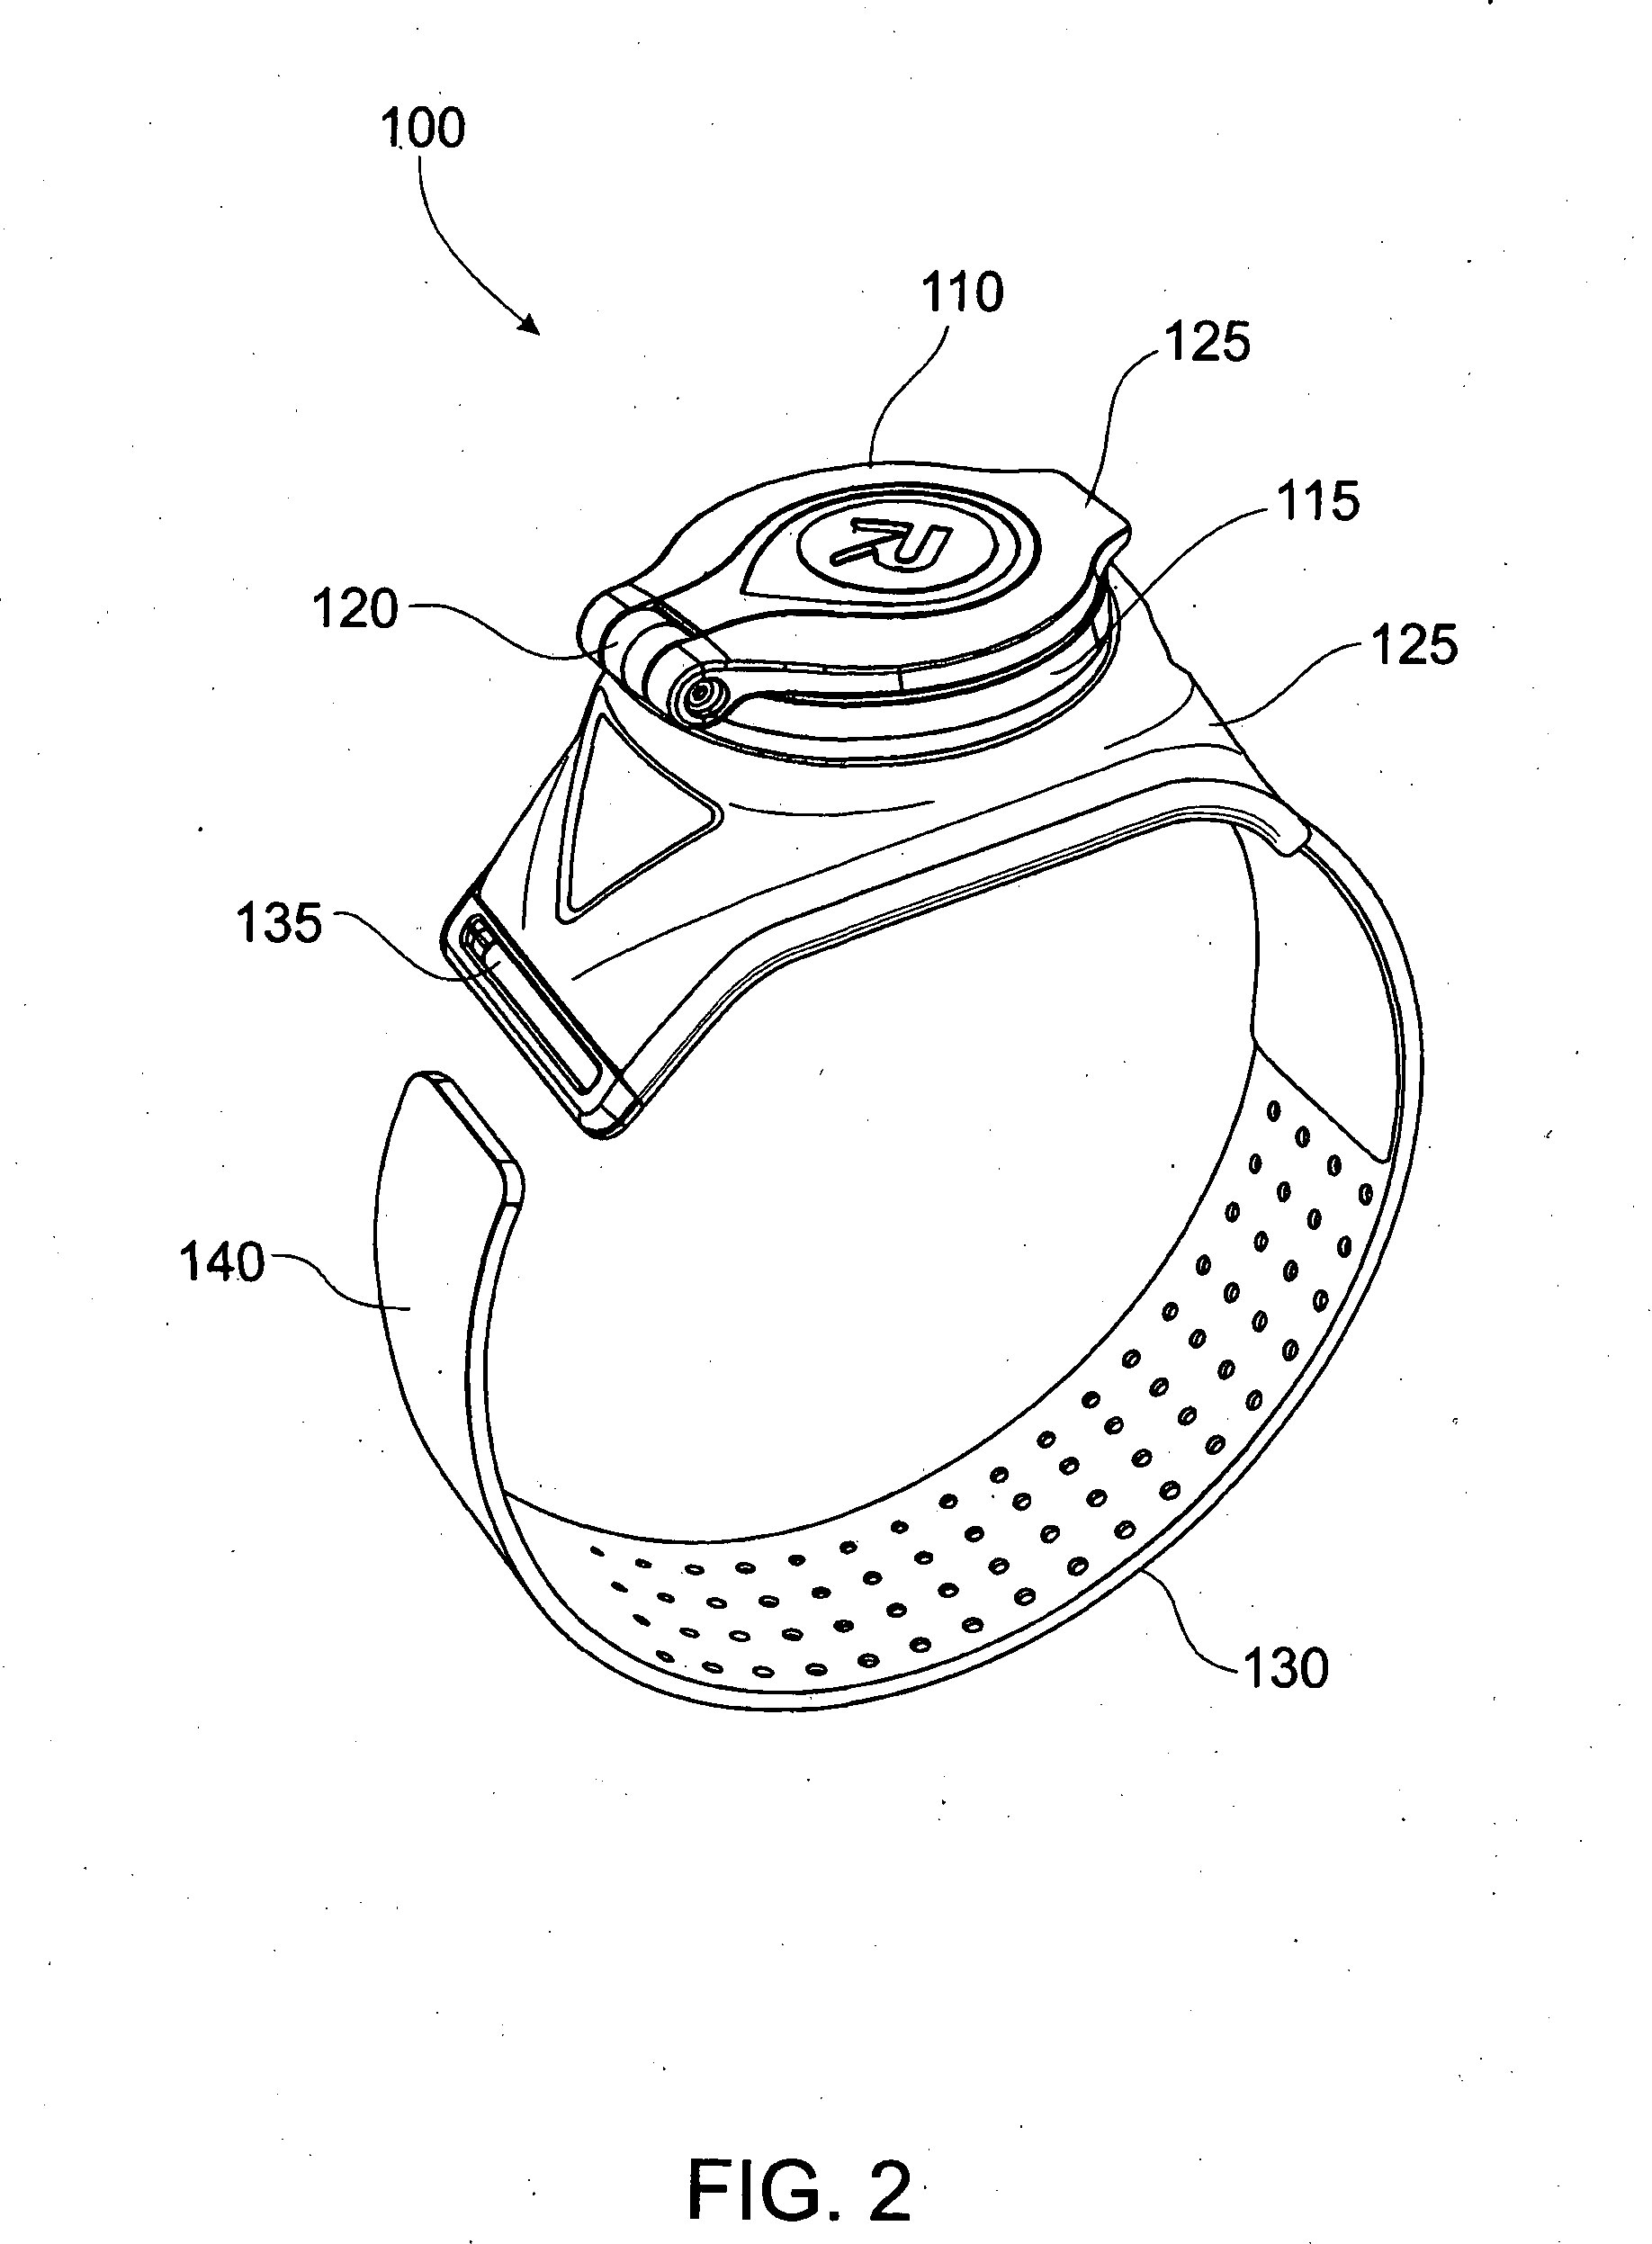 Wearable Reflective Device